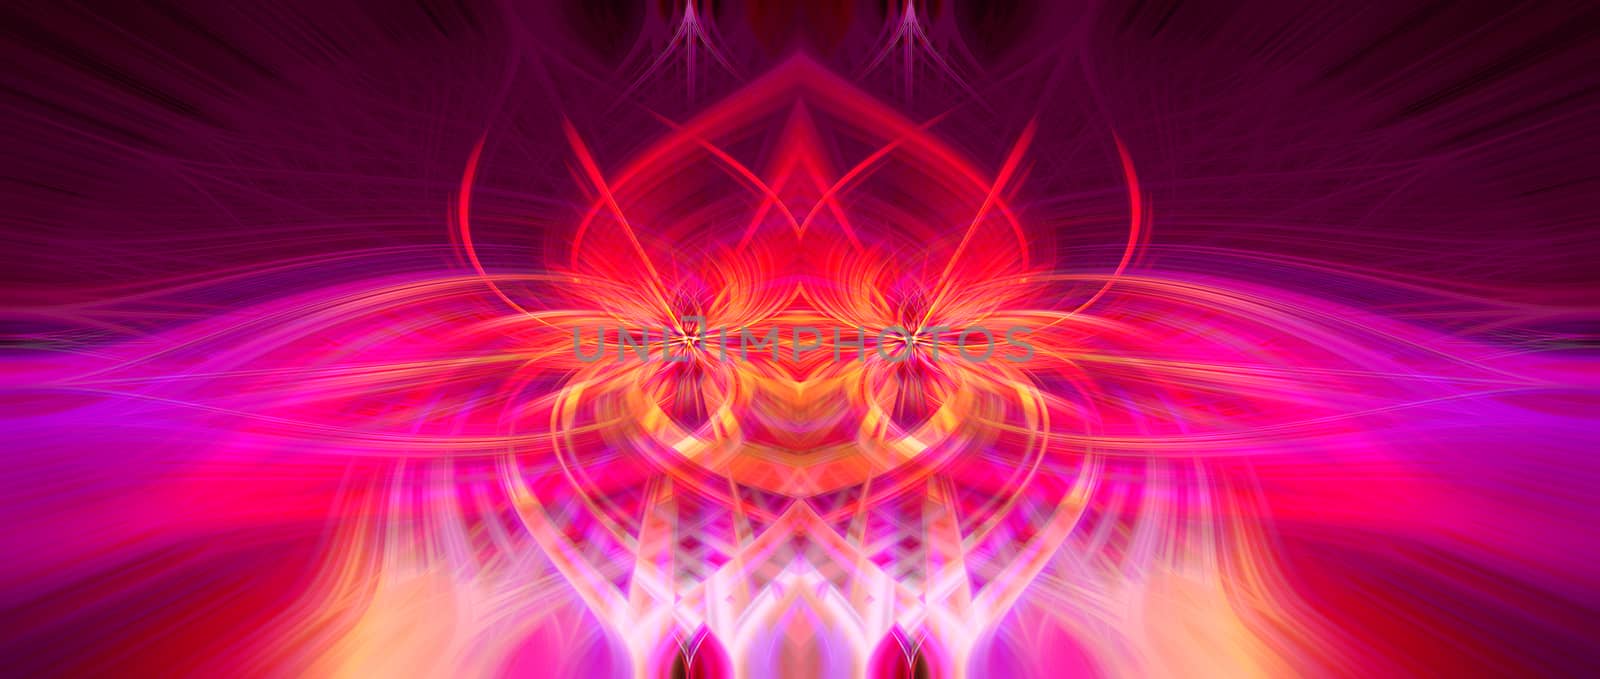 Beautiful abstract intertwined symmetrical 3d fibers forming a shape of sparkle, flame, flower, interlinked hearts. Pink, blue, maroon, orange, and purple colors. Illustration.